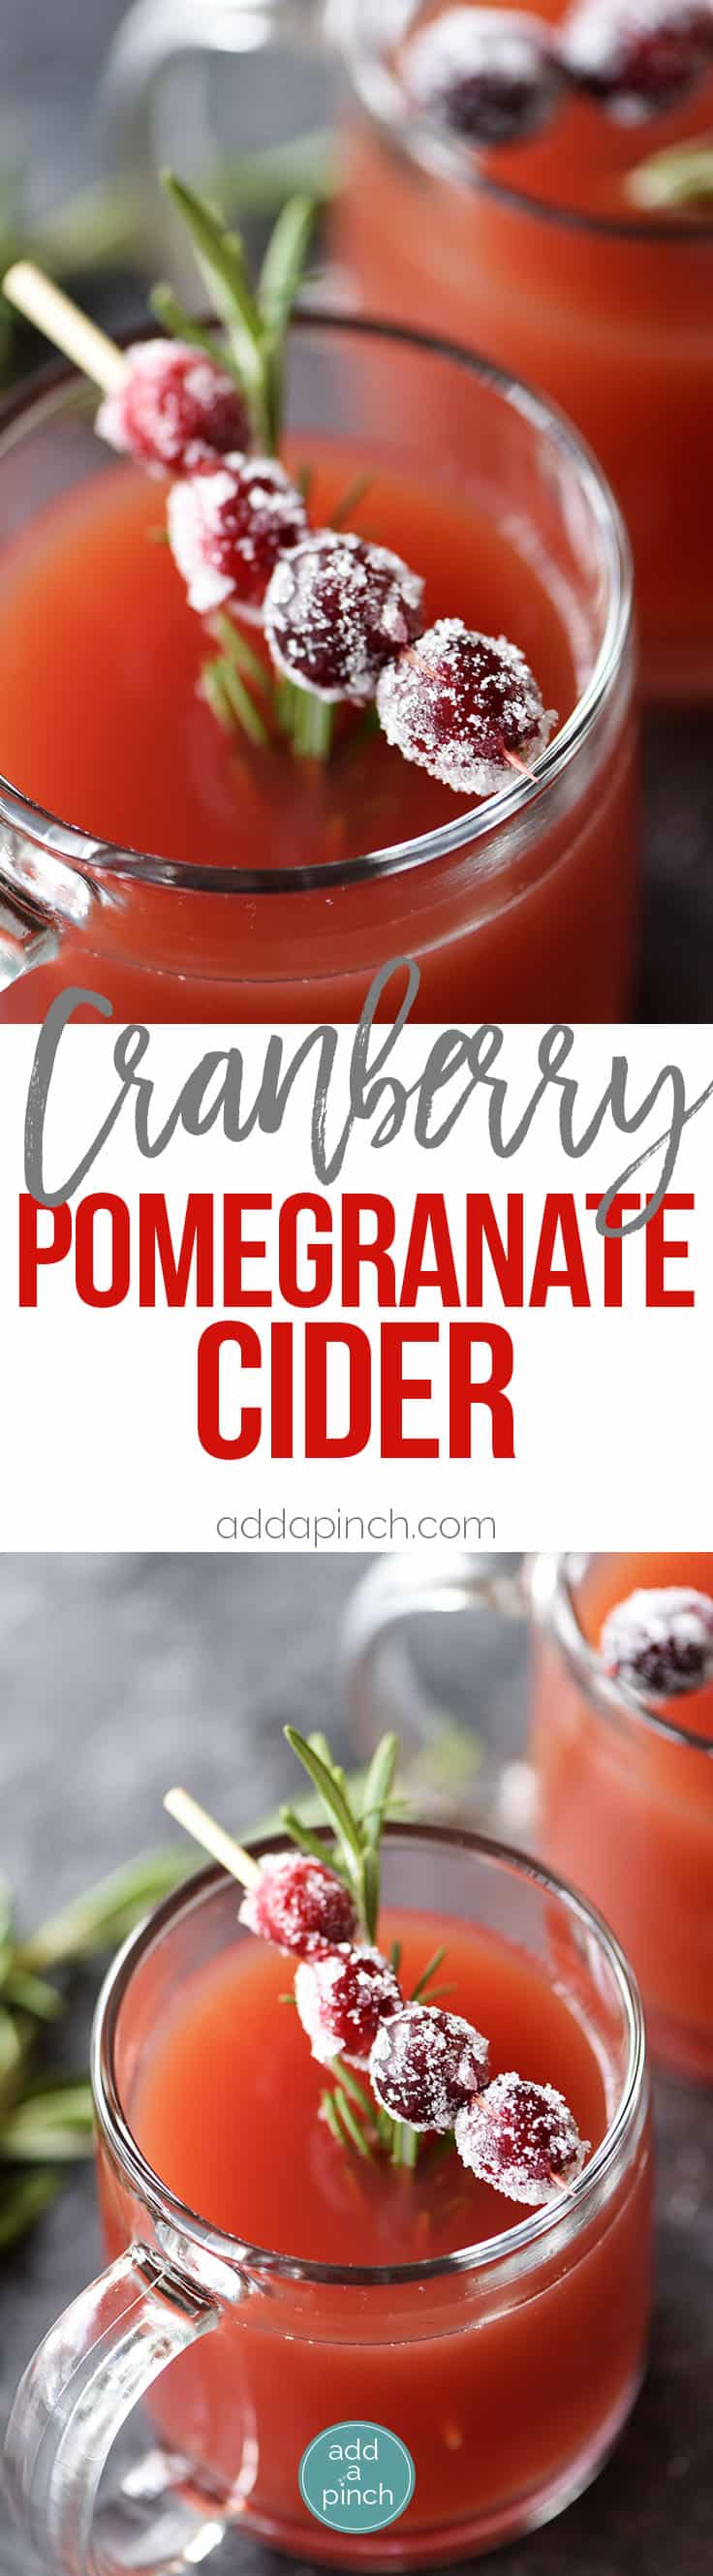 Warm Cranberry Pomegranate Cider Recipe - This quick and easy warm cranberry pomegranate cider recipe makes the perfect sip to stay warm and cozy! // addapinch.com